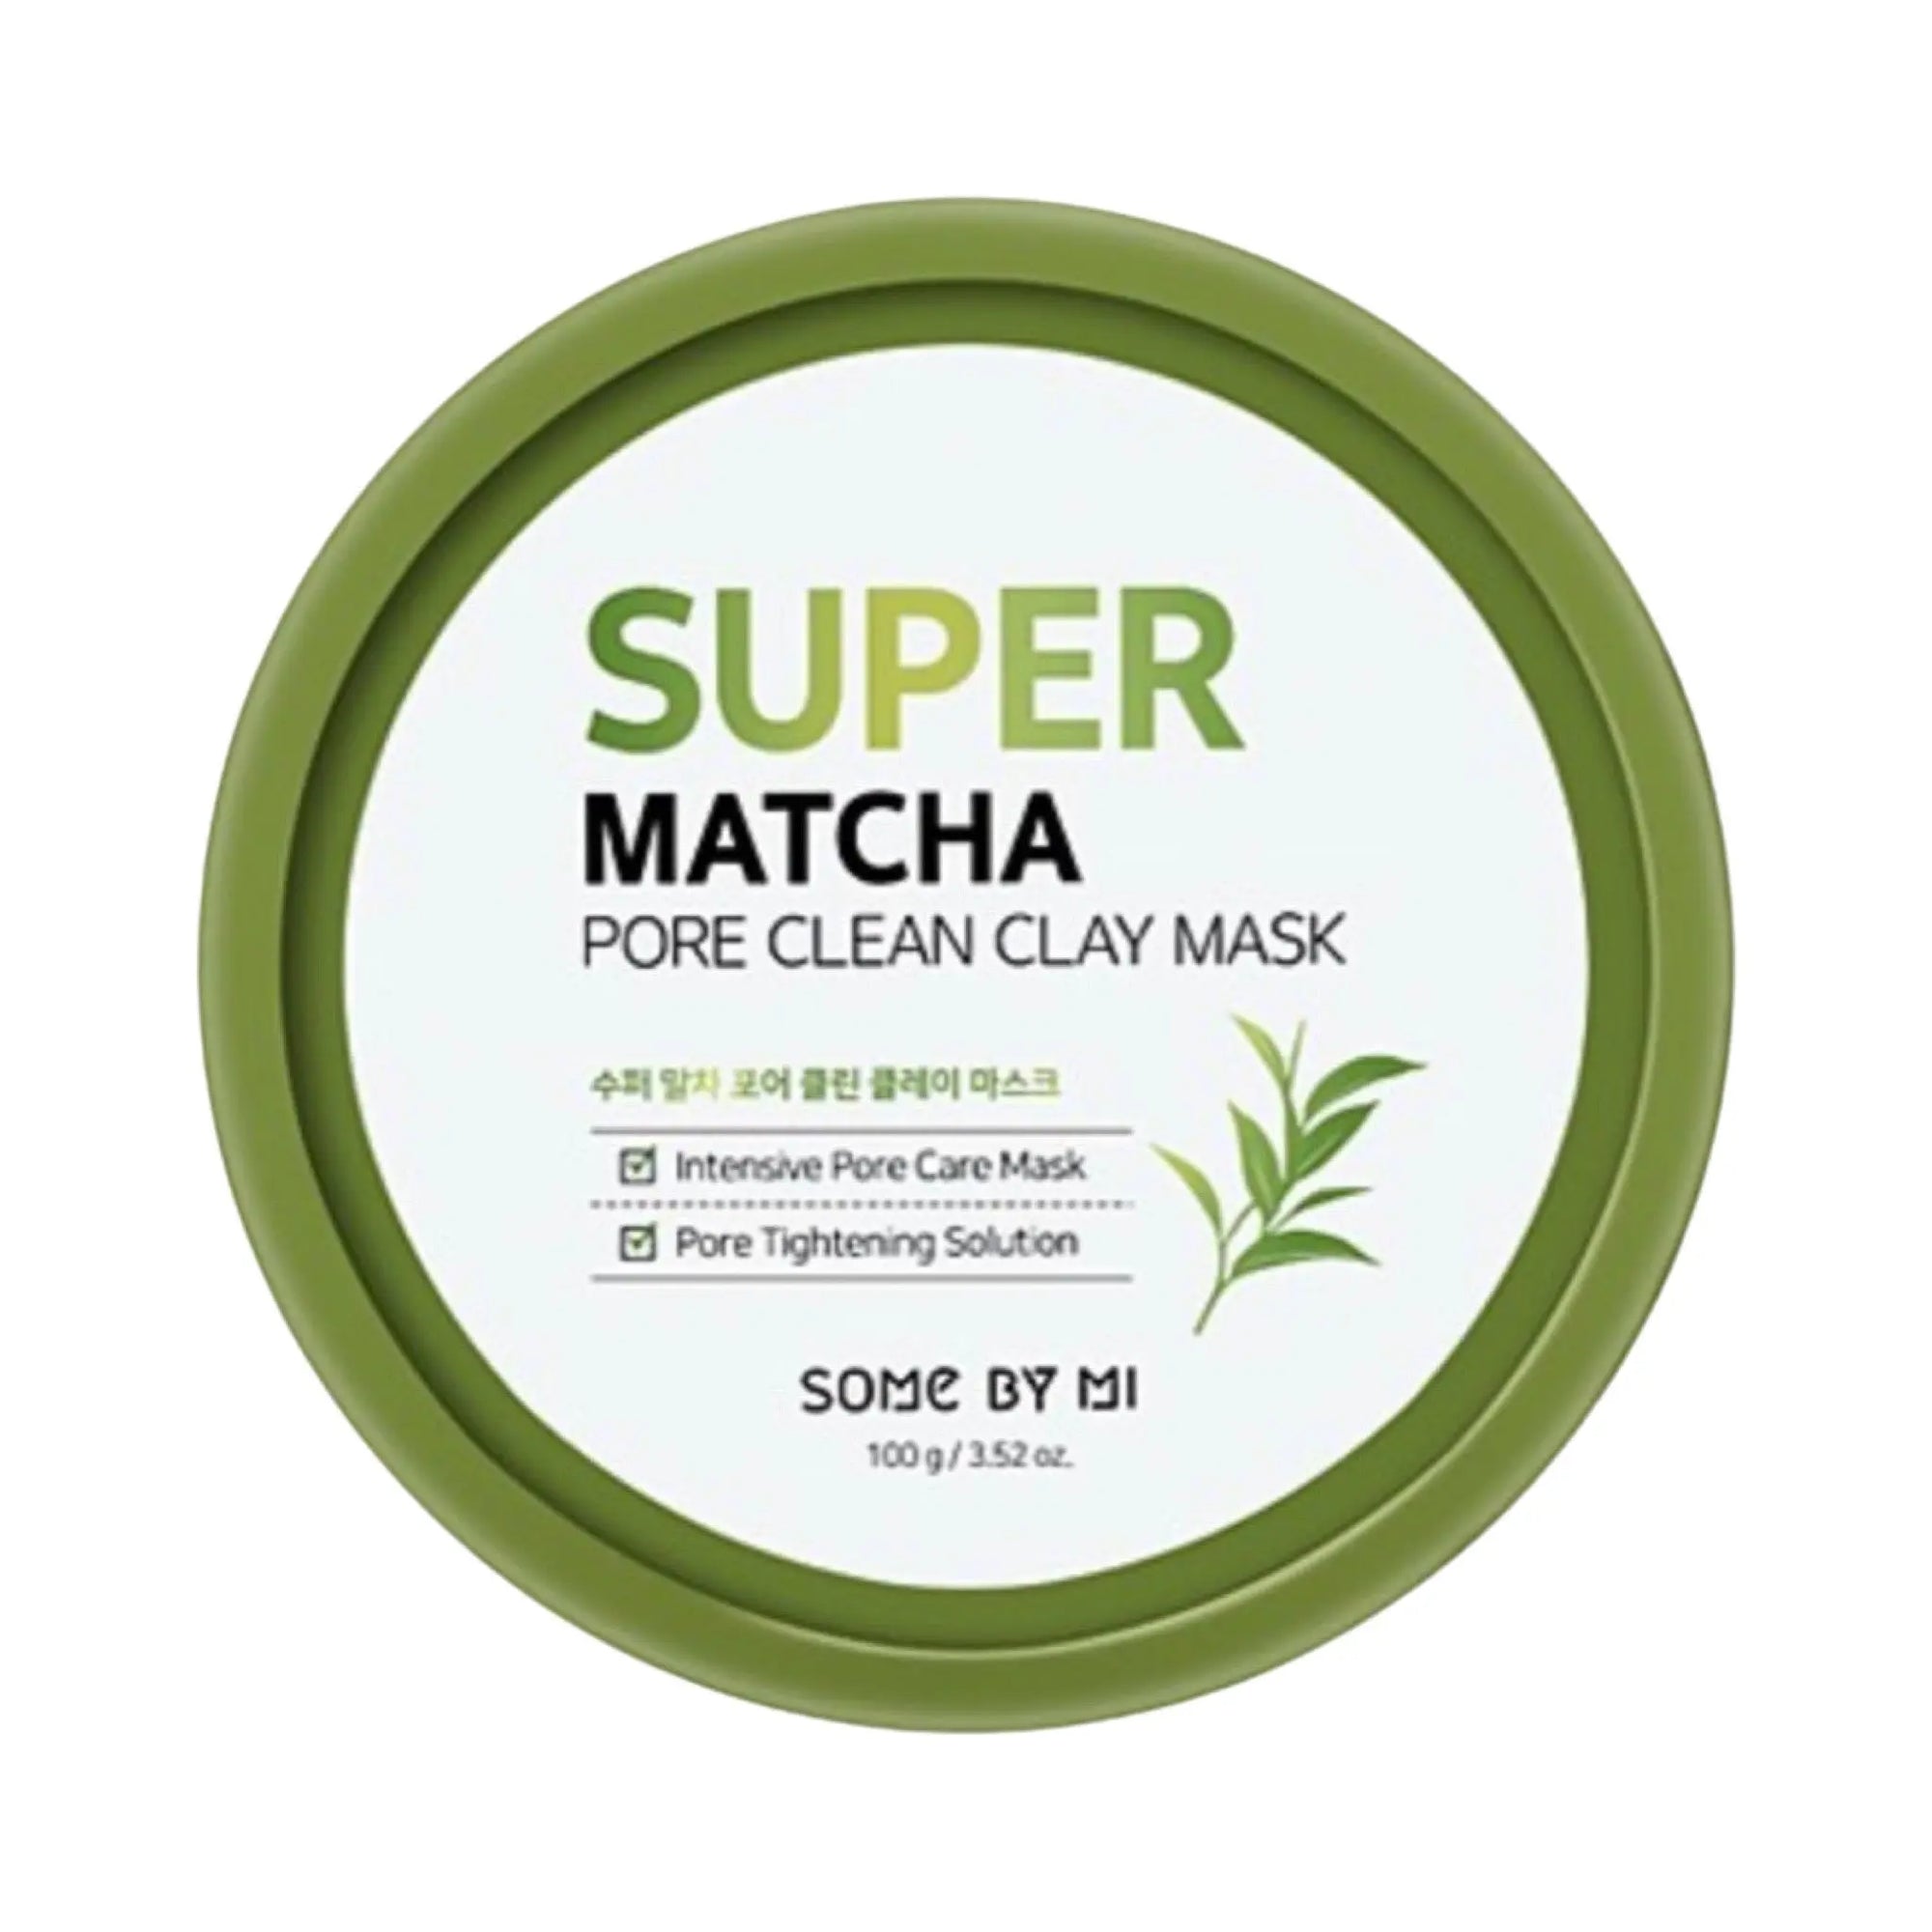 Some By Mi - Super Matcha Pore Clean Clay Mask 100g Some By Mi